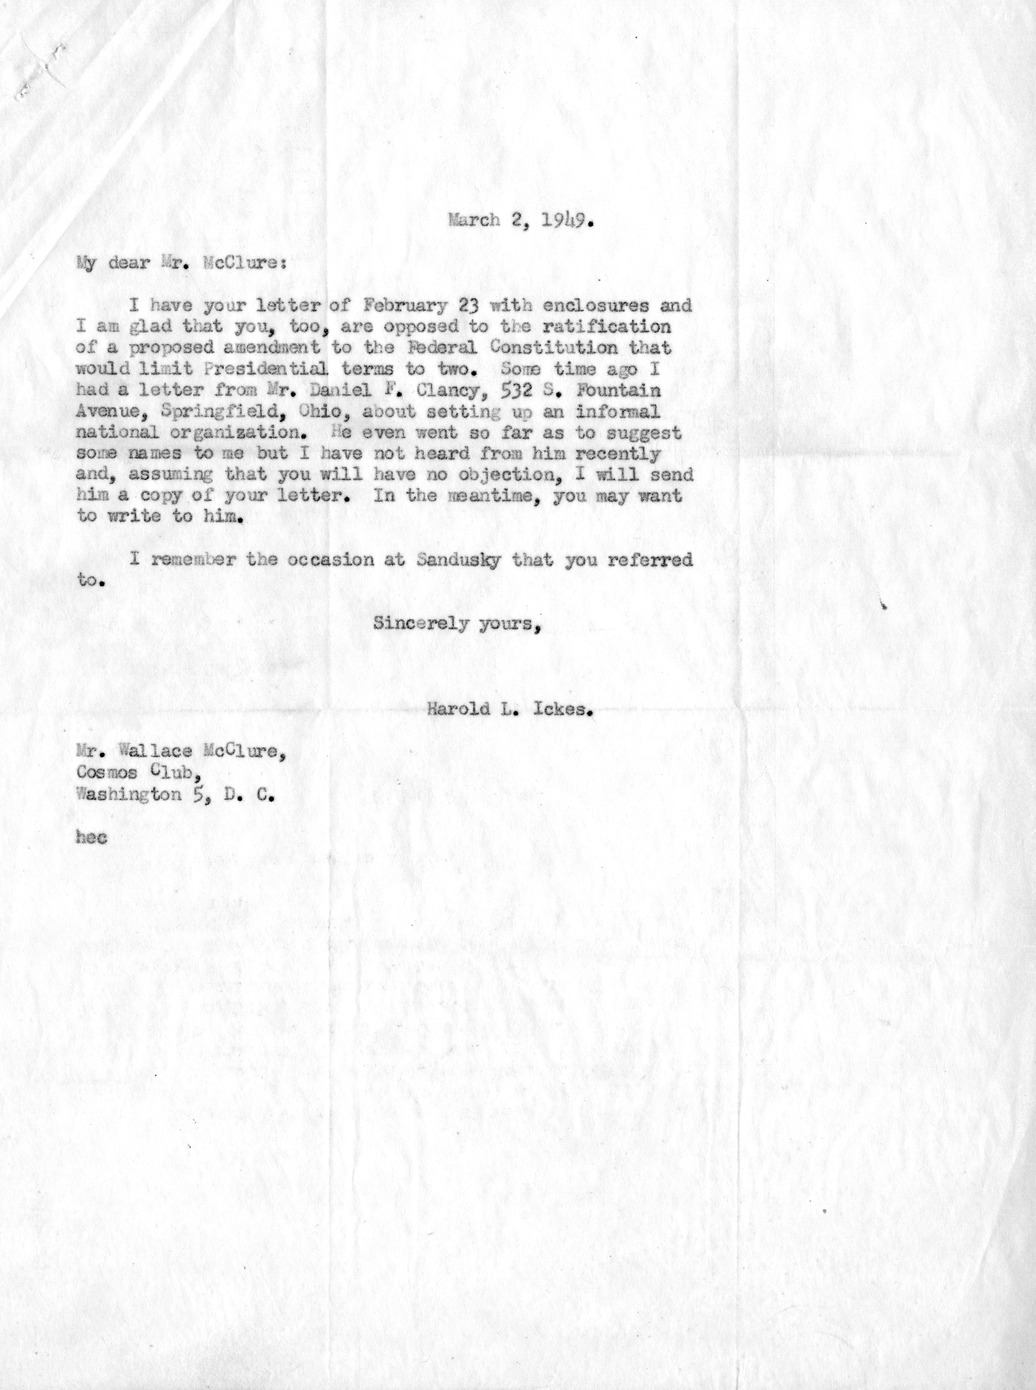 Correspondence Between Wallace McClure and Harold Ickes